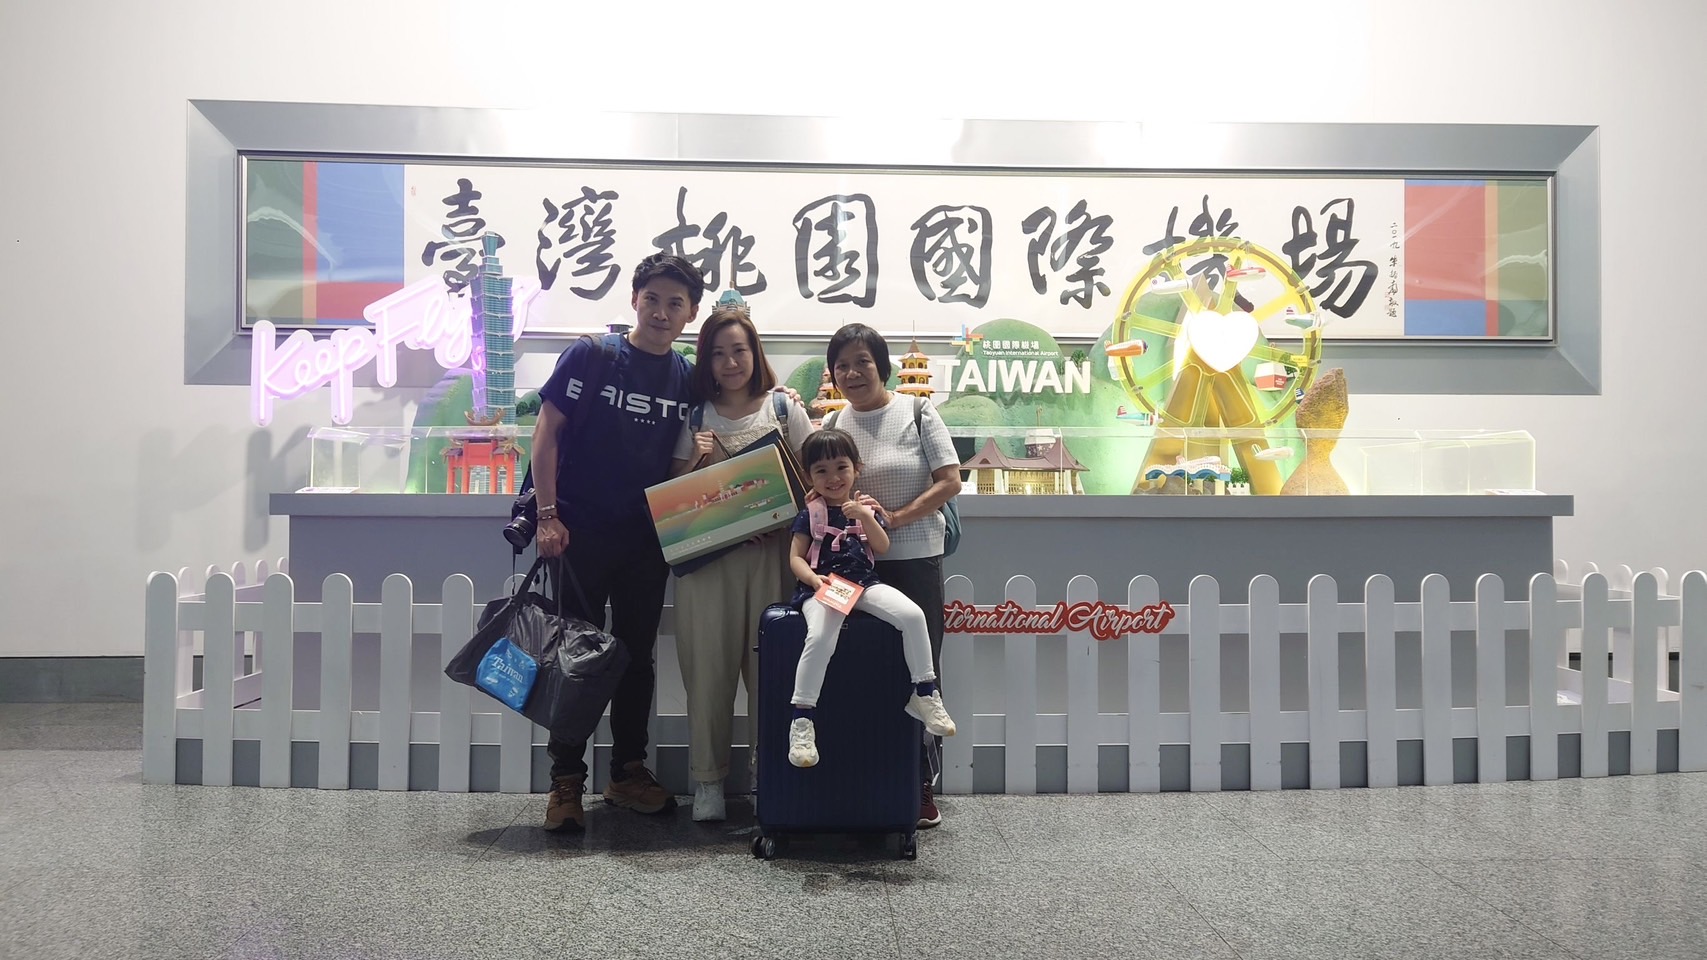 Taiwan's tourism market is recovering, and the Tourism Bureau welcomes the 2 millionth visitor to Taiwan this year!  Photo provided by Tourism Bureau, MOTC